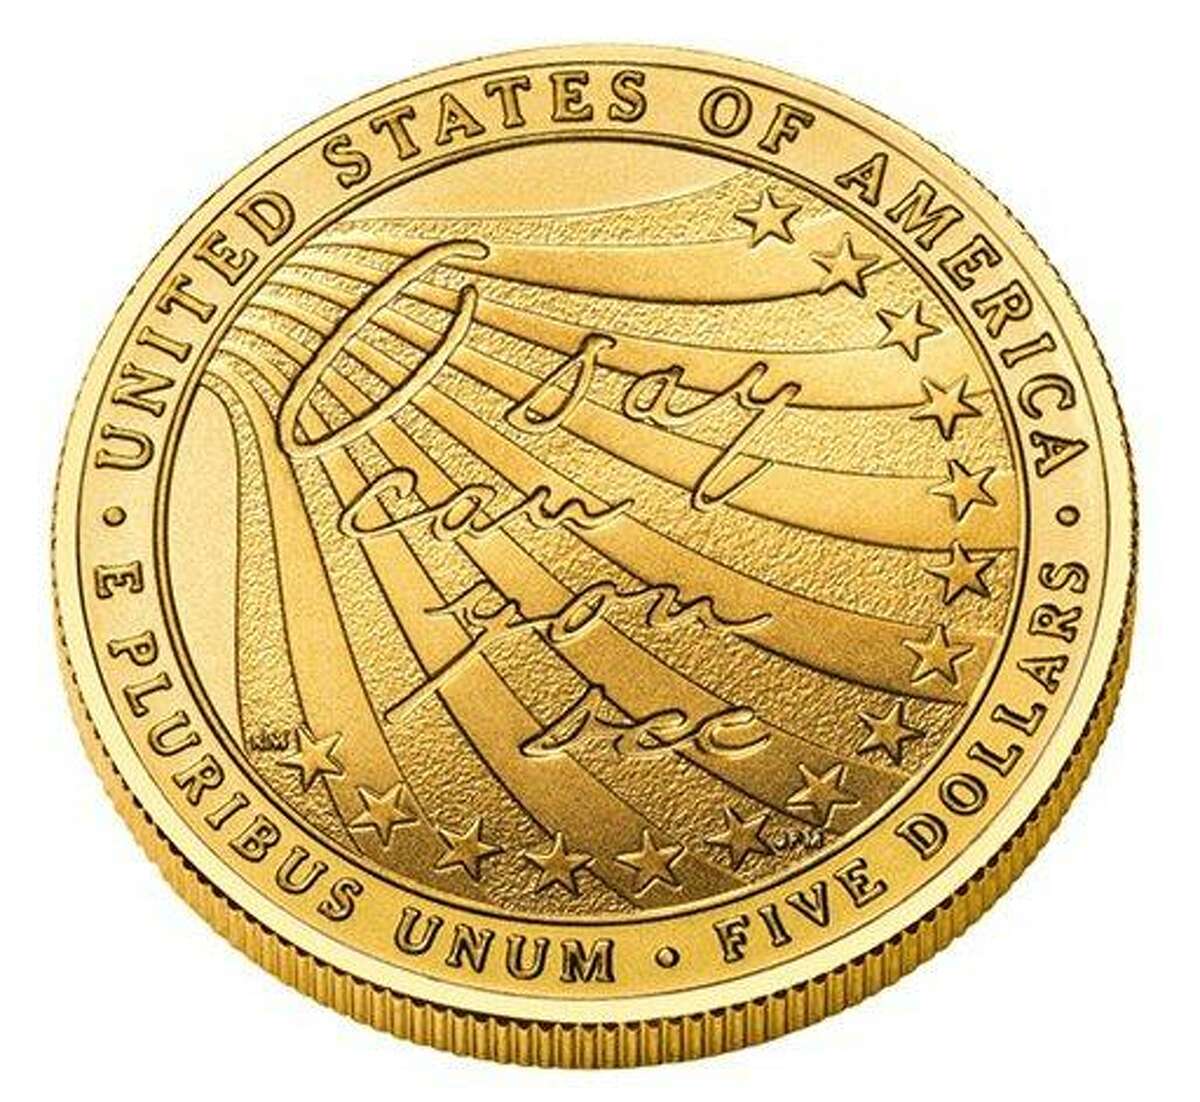 This image provided by Star-Spangled 200 shows the reverse side of a gold coin commemorating the 200th anniversary of the writing of "The Star-Spangled Banner." The U.S. Mint began selling the coins Monday, and they?ll be available through mid-December. The coins depict the Battle of Baltimore during the War of 1812 that was the basis for the national anthem. Some 100,000 gold coins and 500,000 silver coins will be produced. Associated Press